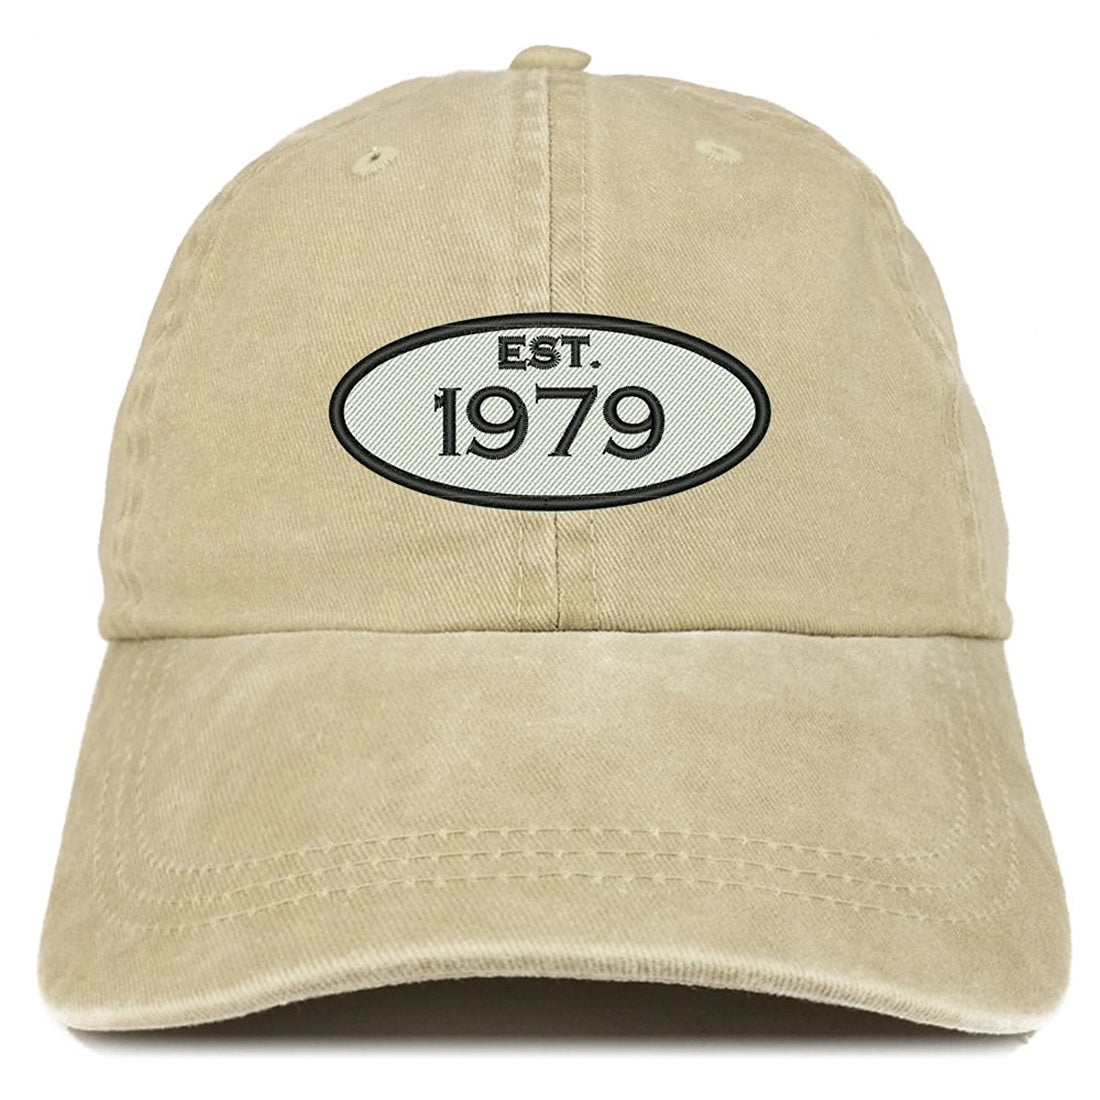 Trendy Apparel Shop Established 1979 Embroidered 40th Birthday Gift Pigment Dyed Washed Cotton Cap